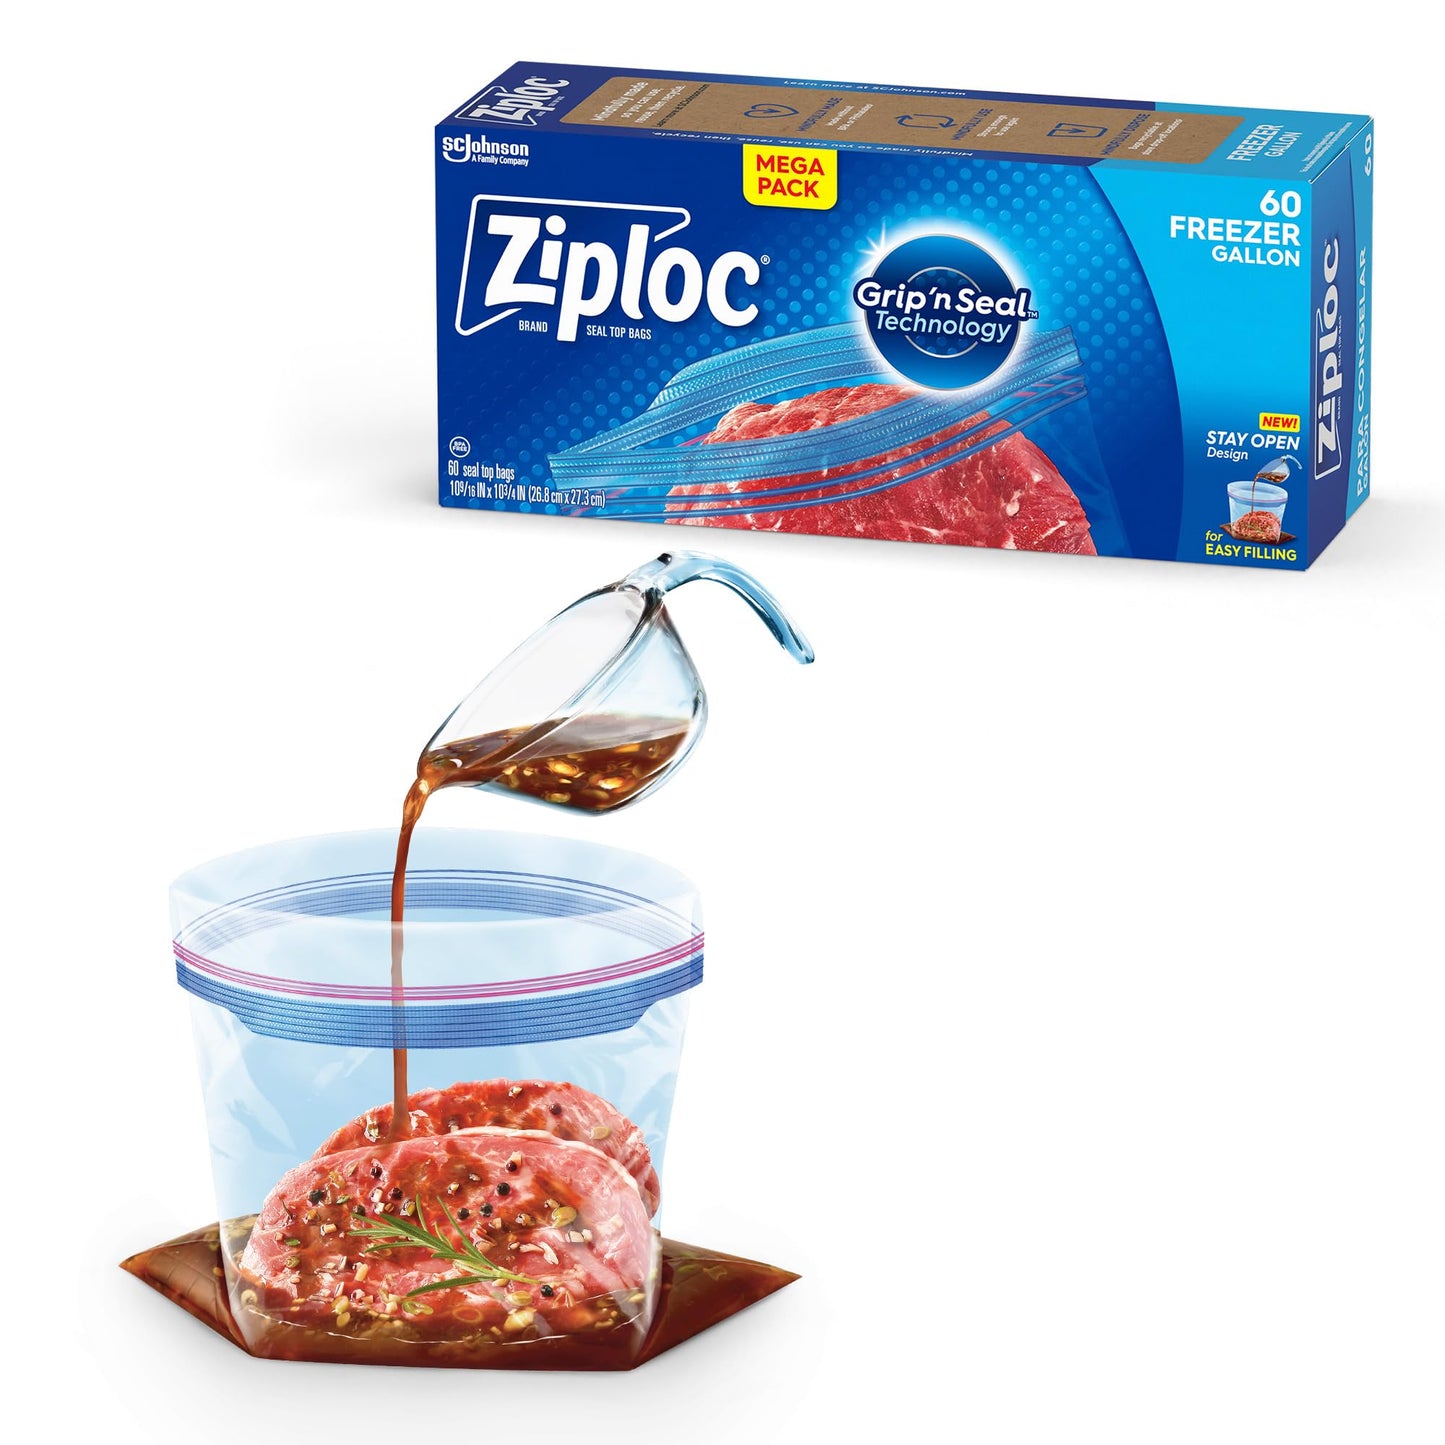 Ziploc Gallon Food Storage Freezer Bags, New Stay Open Design with Stand-Up Bottom, Easy to Fill, 60 Count